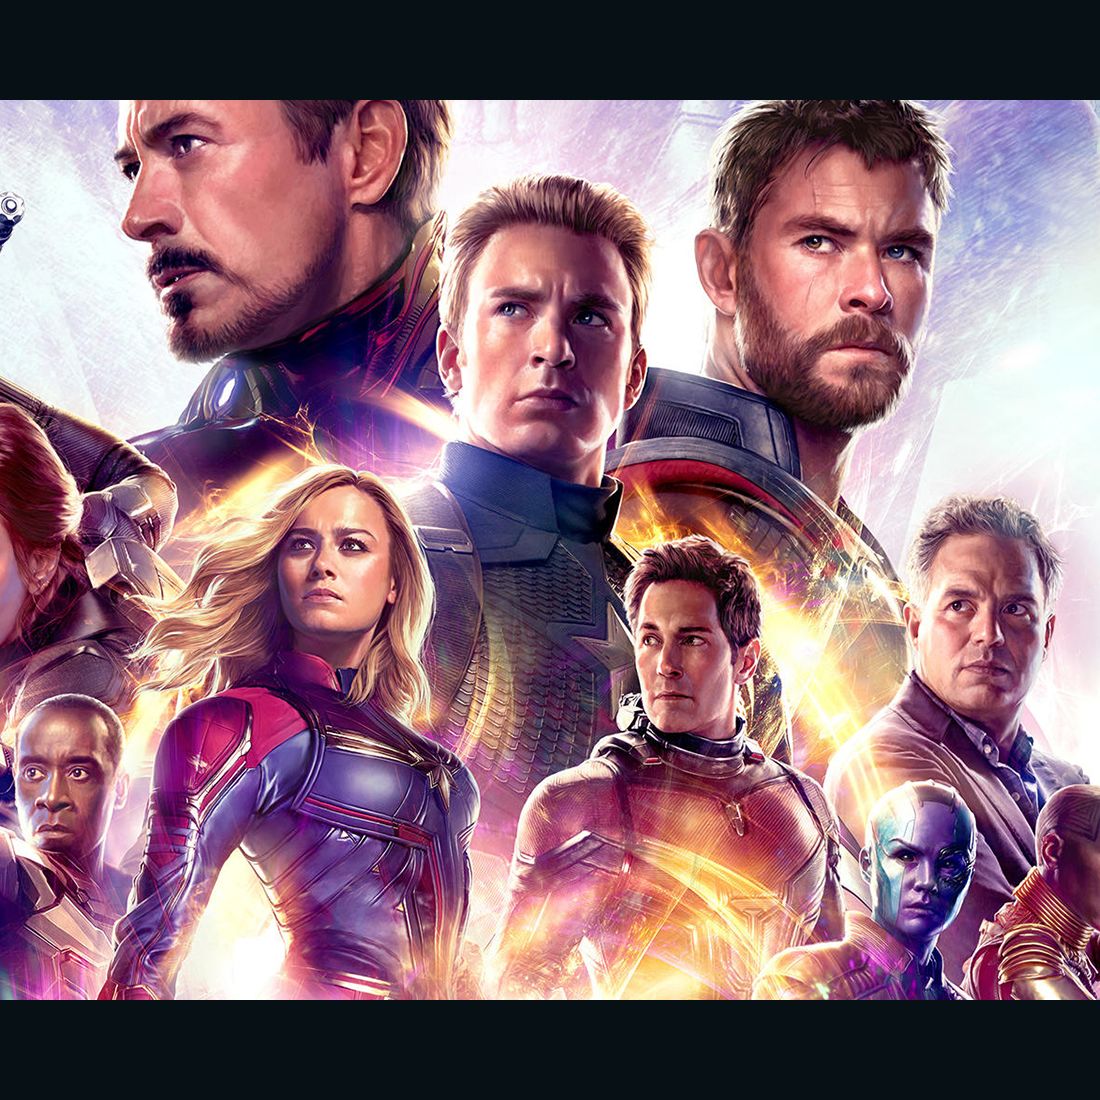 Avengers: Endgame' shatters records with $ billion opening | CNN Business